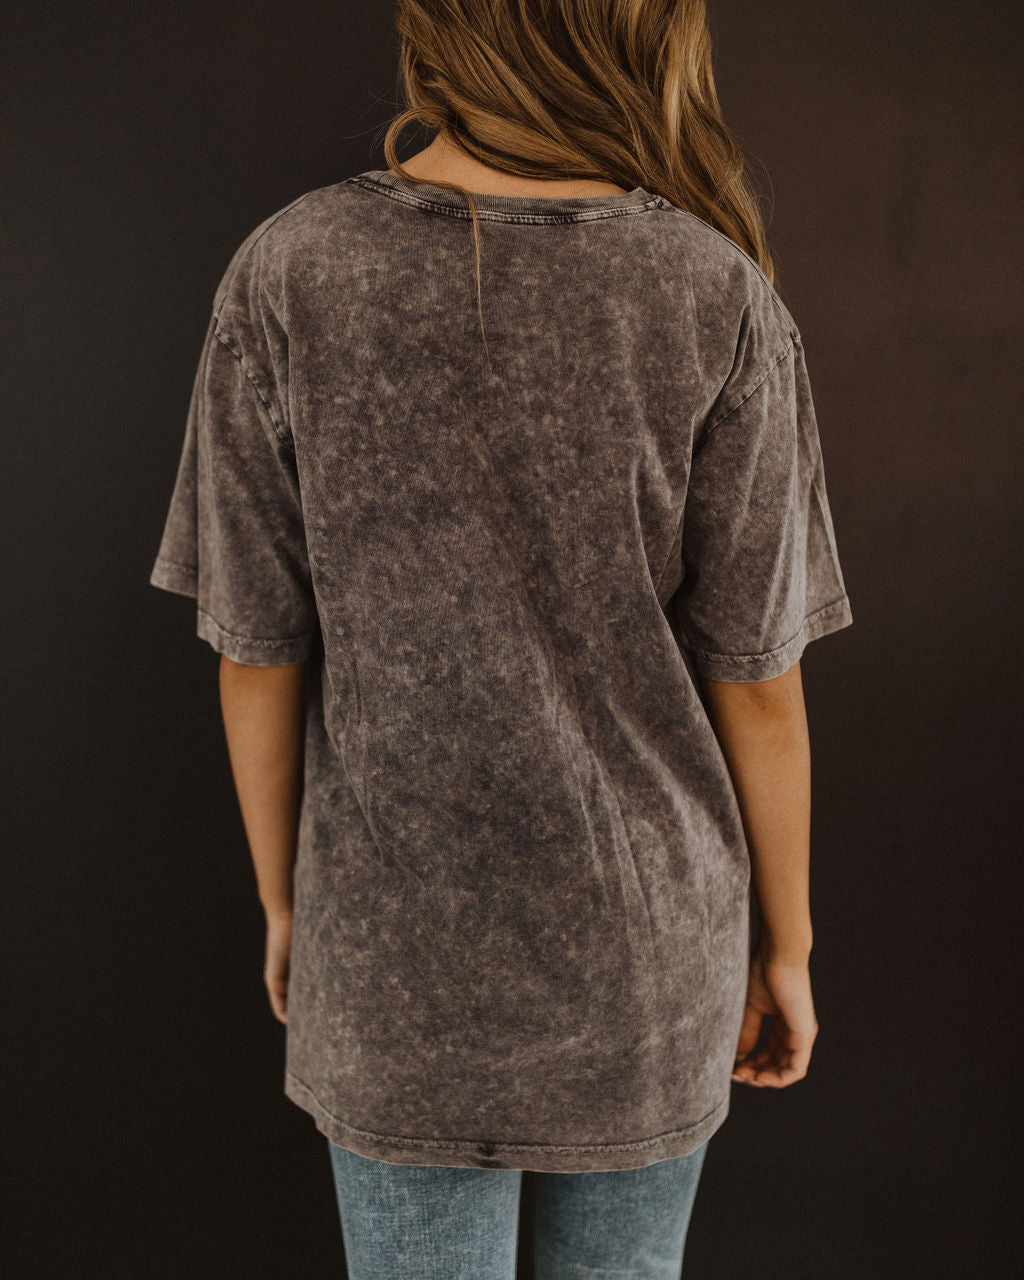 THE FREEDOM RIDER GRAPHIC TEE IN CHARCOAL